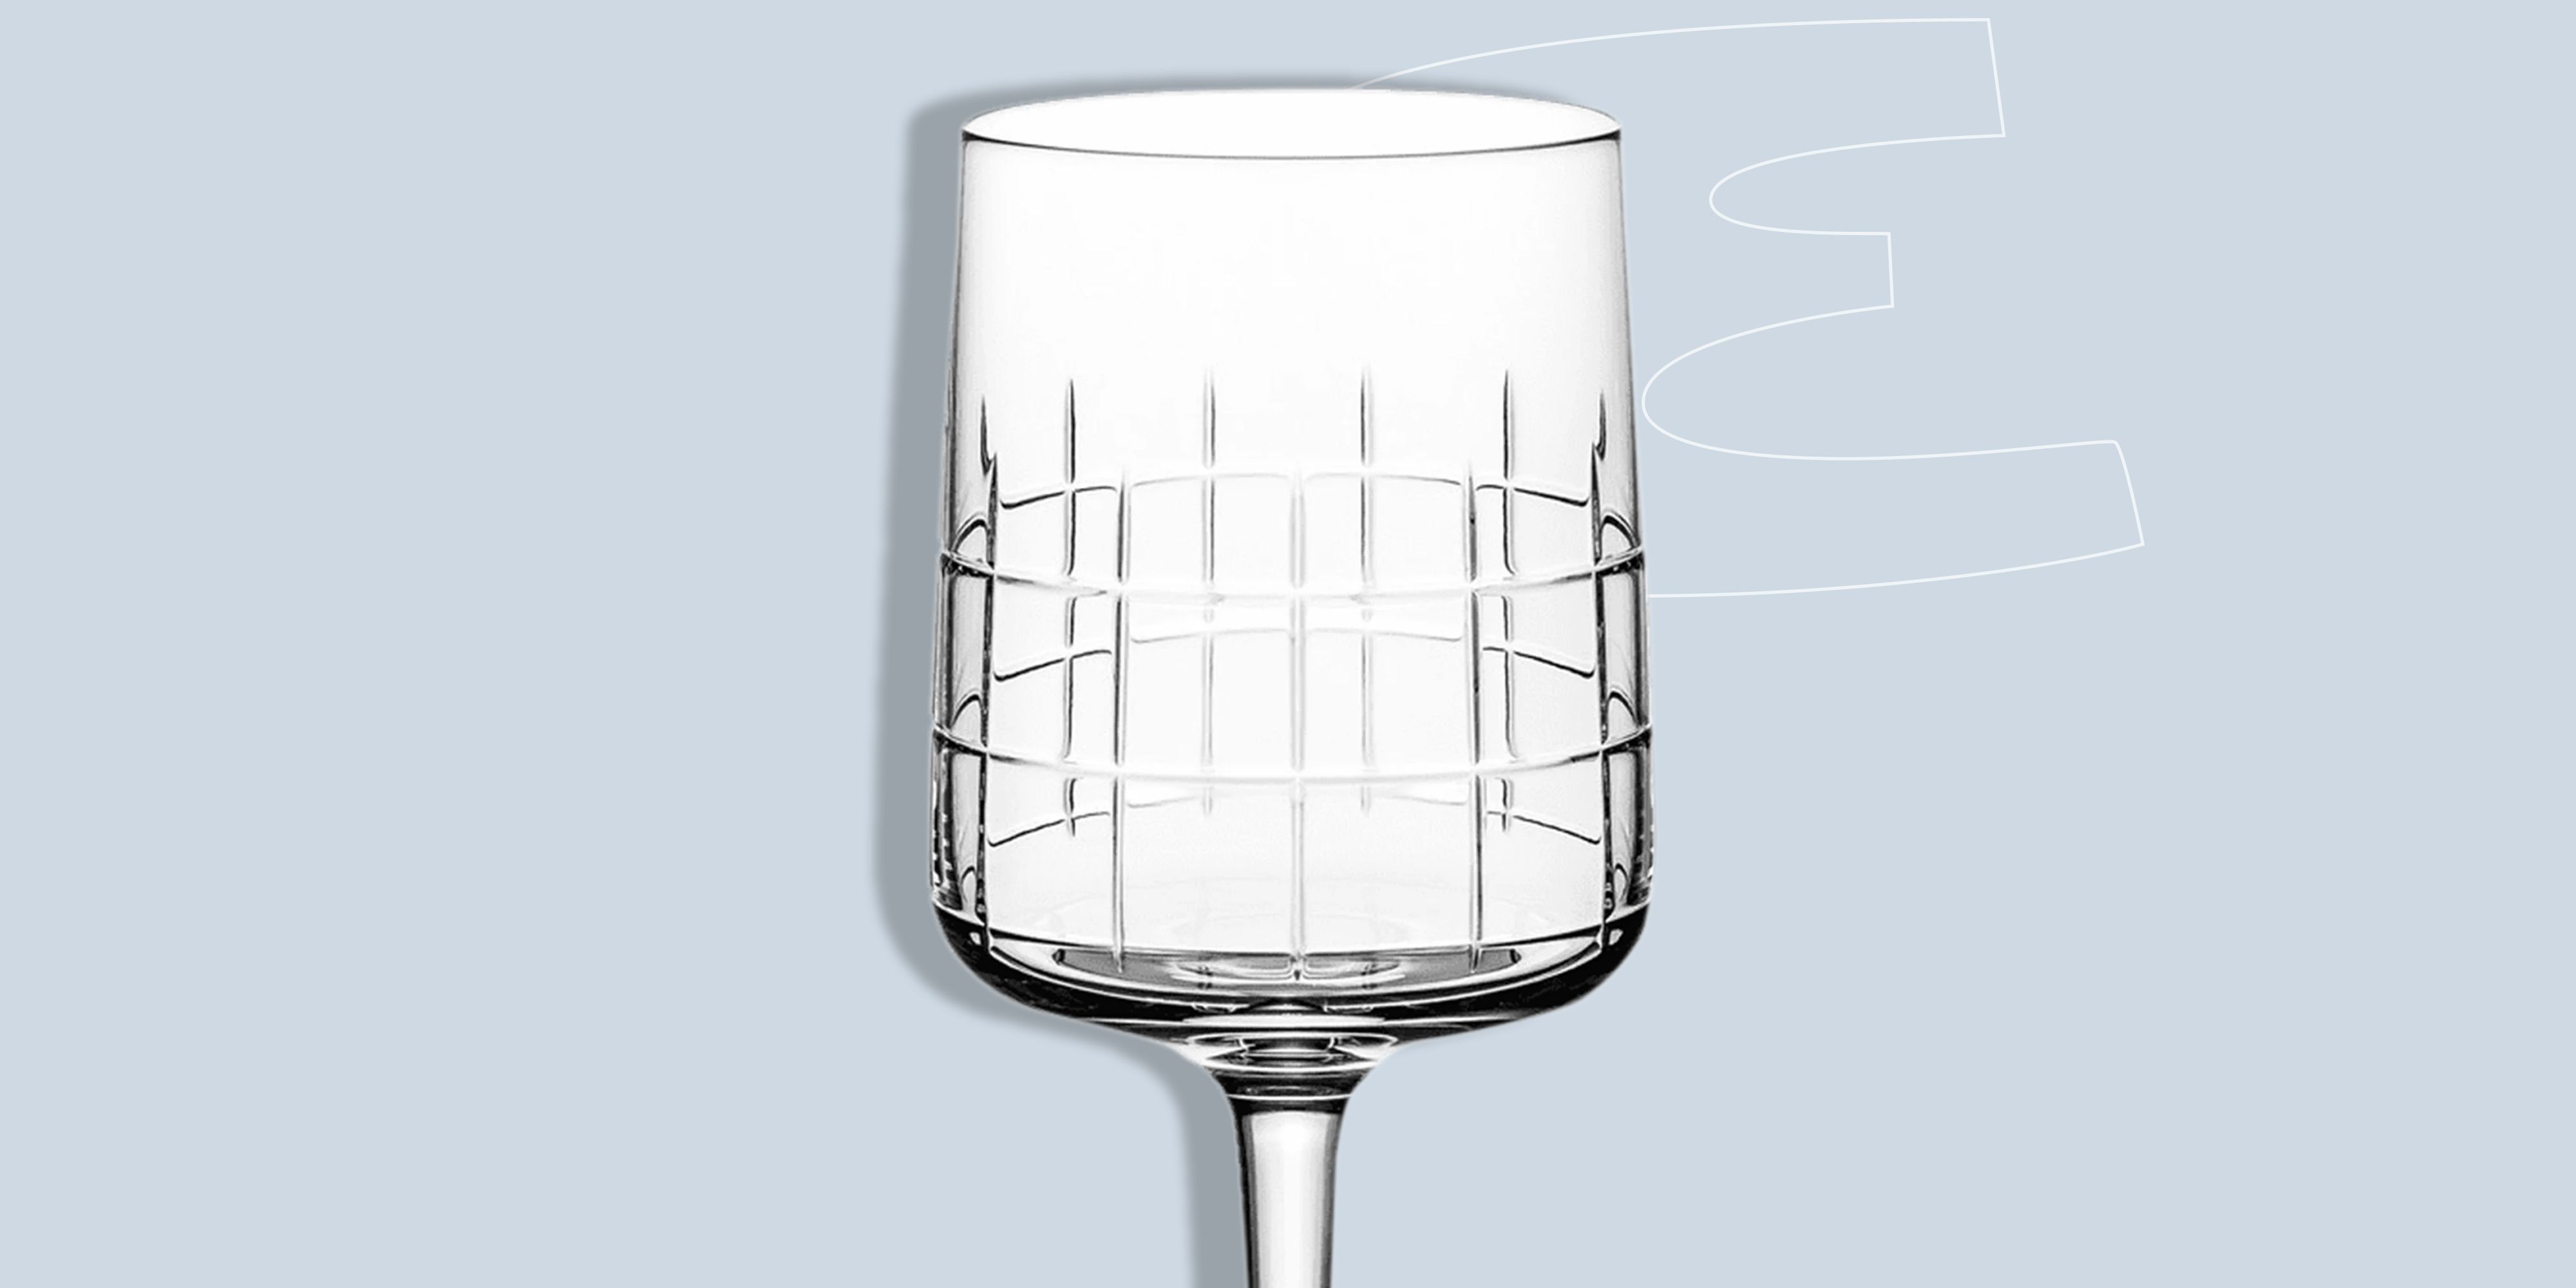 The Best Red Wine Glasses in 2022